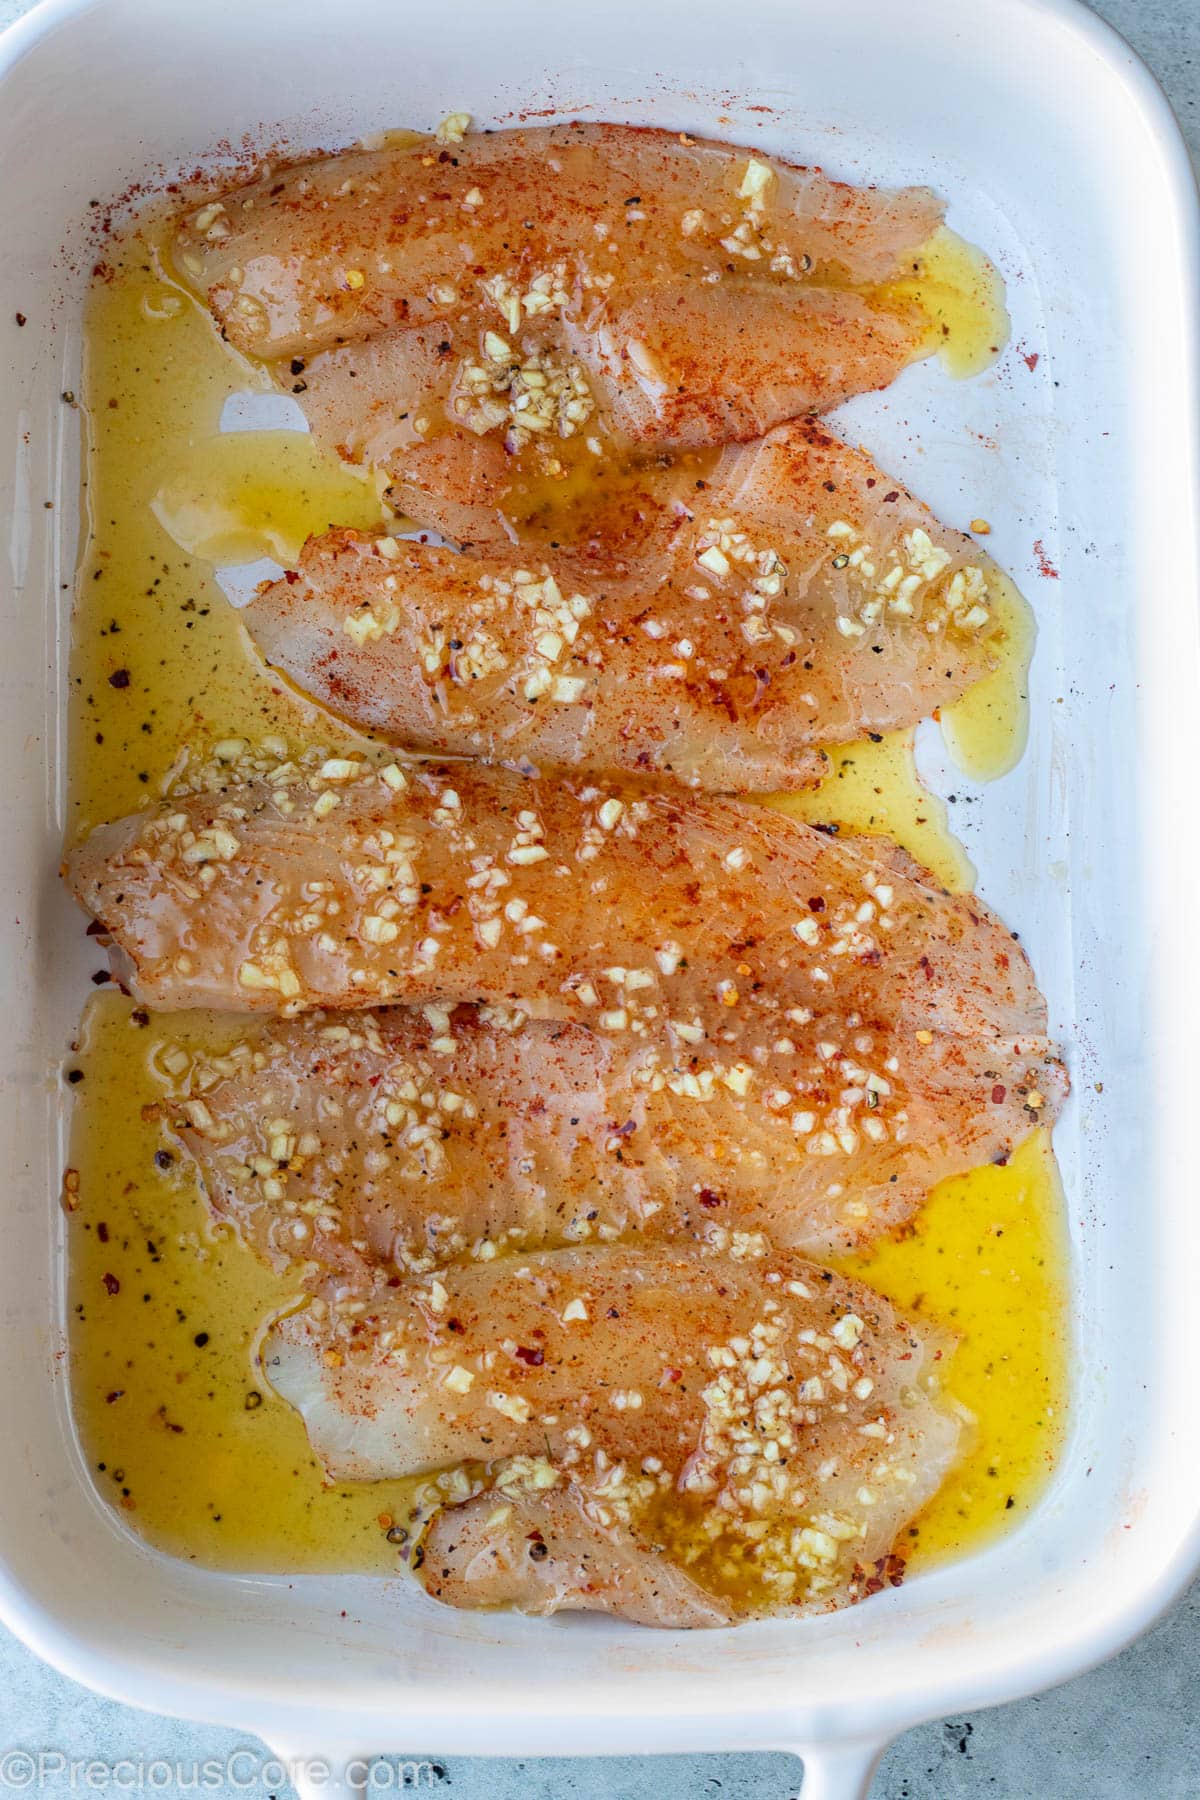 Raw fish fillets covered with garlic butter sauce.